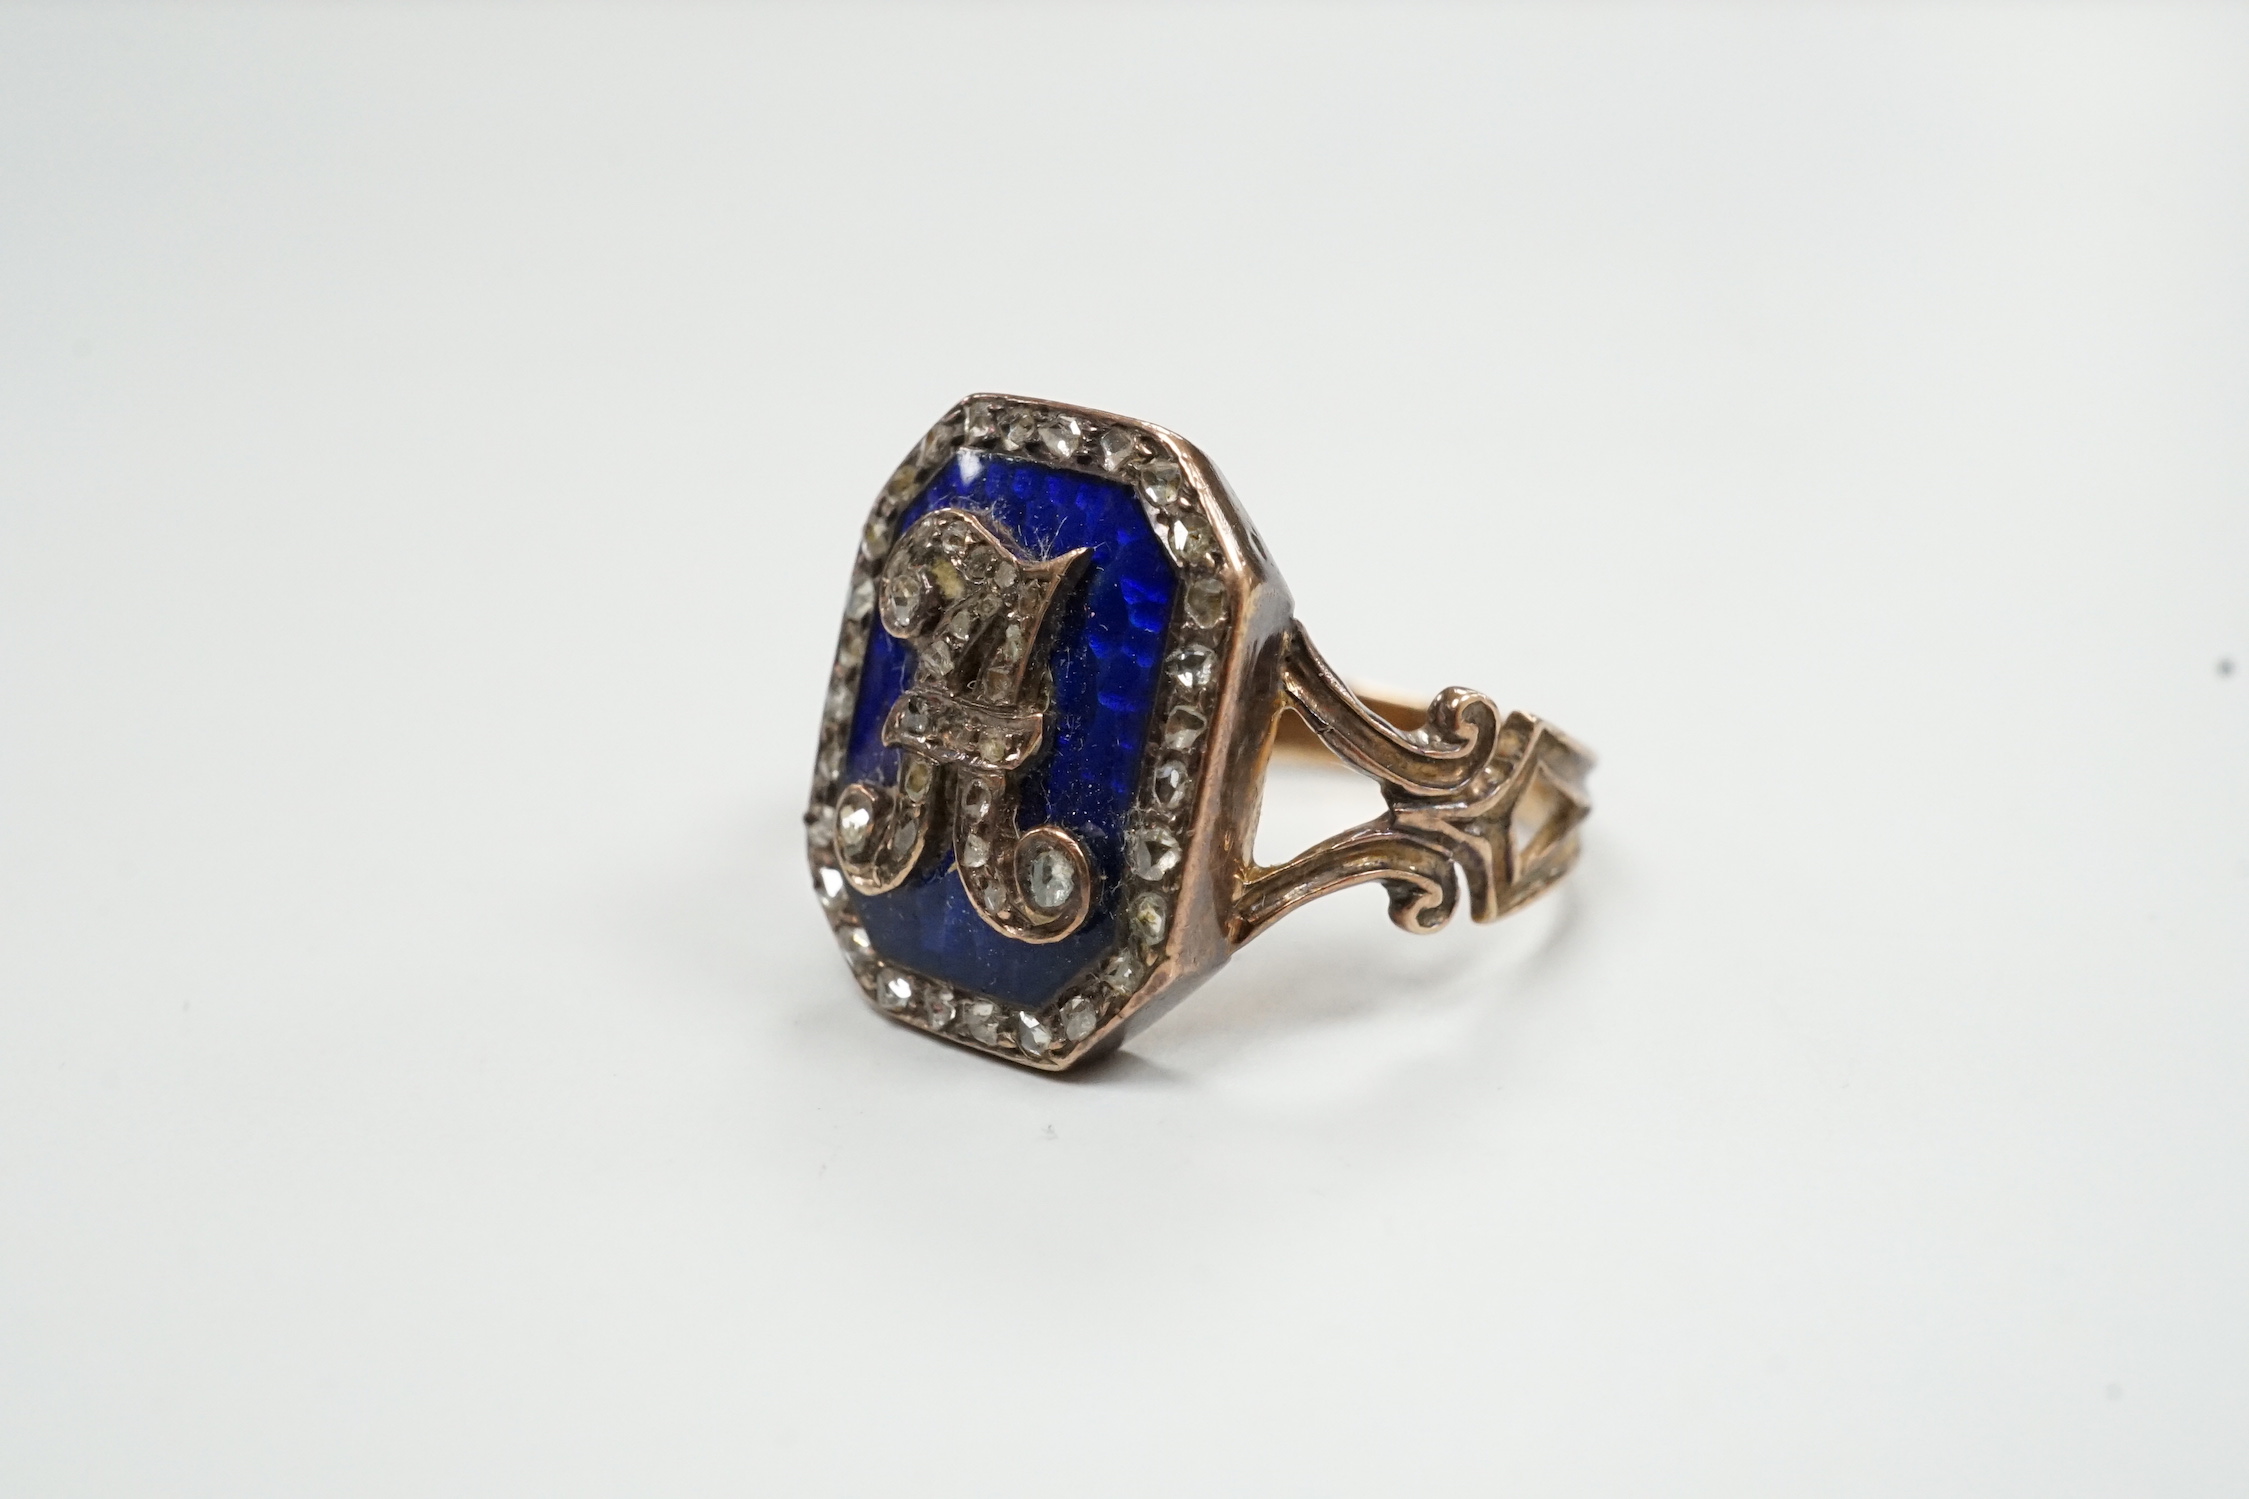 A 19th century yellow metal (stamped 18), enamel and rose cut diamond set initial ring, size H/I, gross weight 4.9 grams.